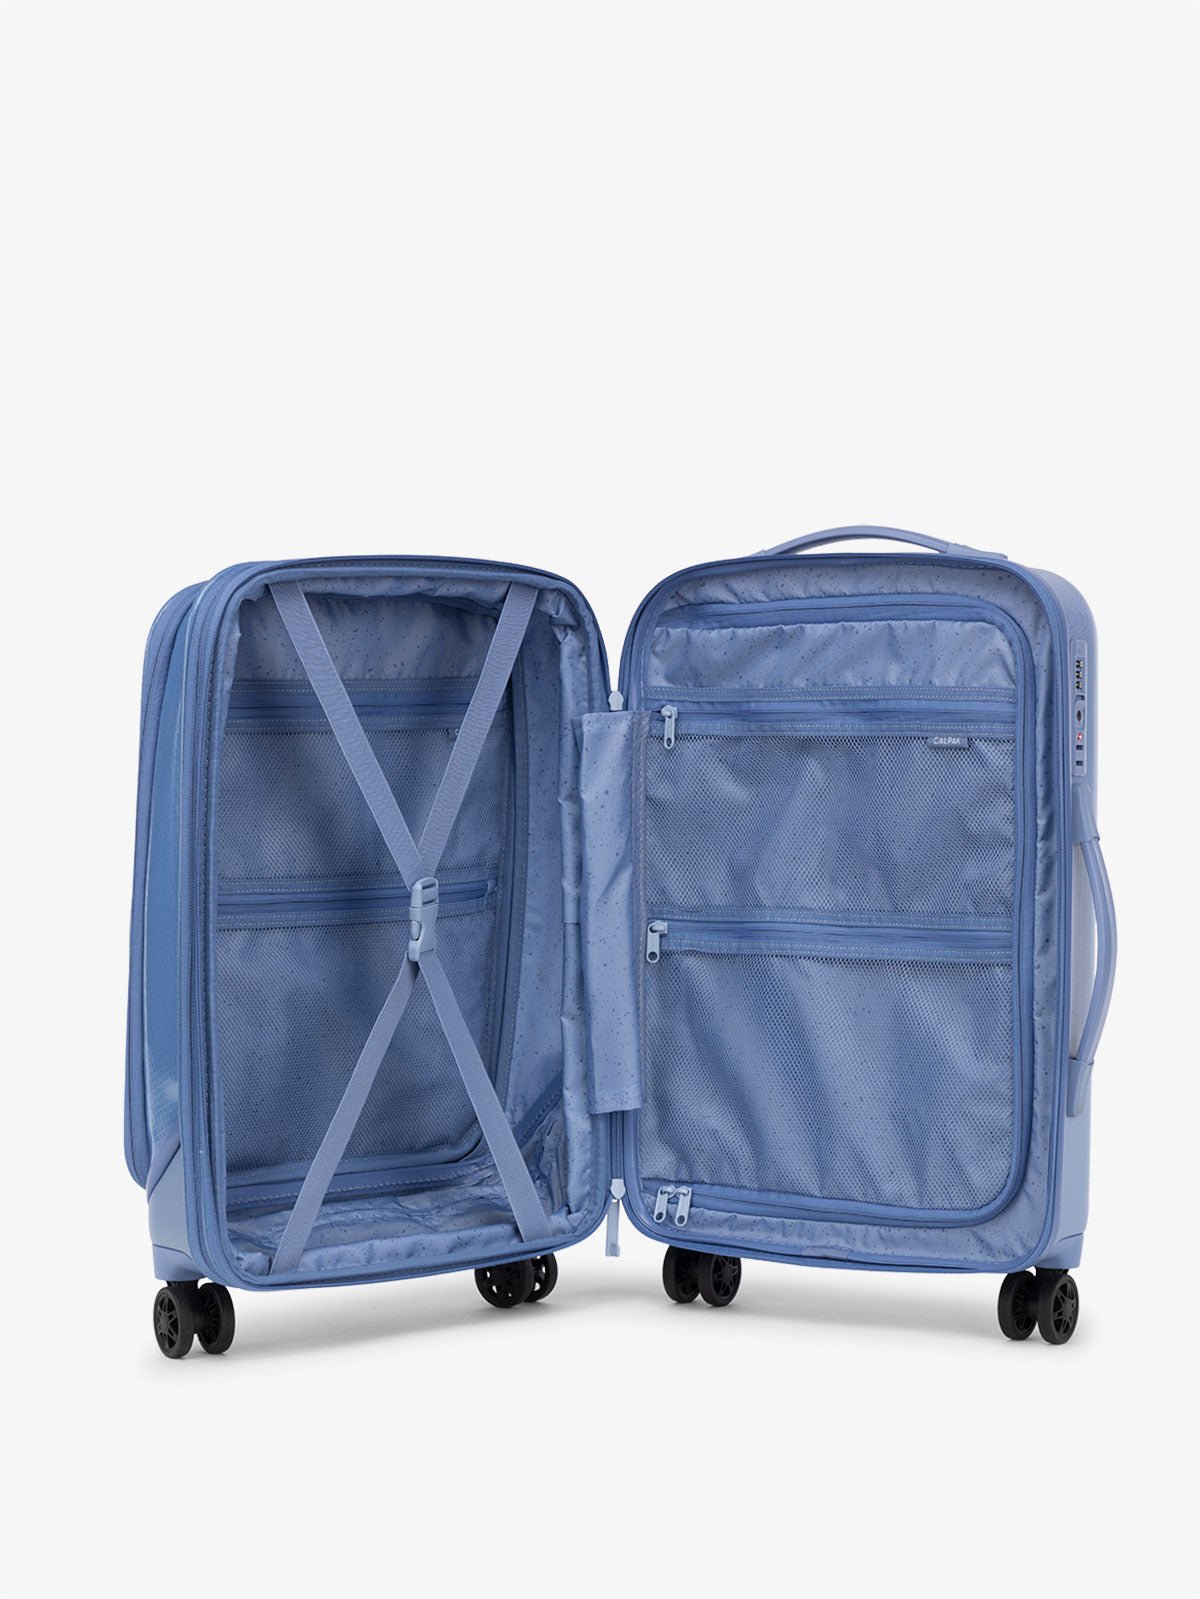 CALPAK Terra Carry-On Luggage interior with multiple pockets and compression strap in glacier